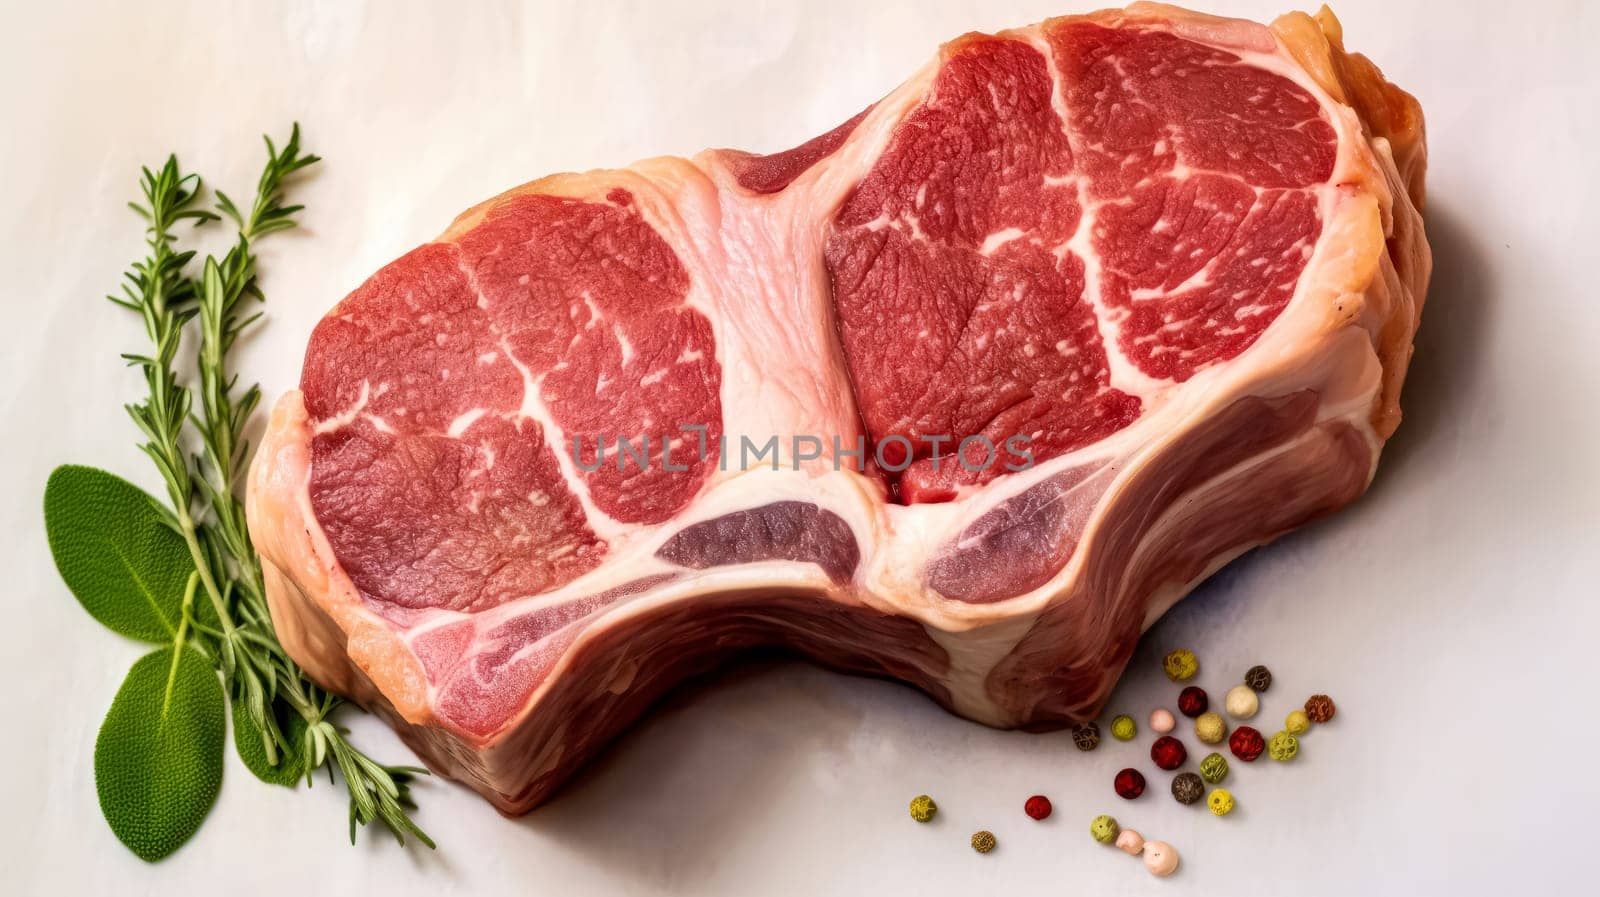 A large piece of meat is displayed on a brown paper with herbs and spices. The meat is cut into a wedge shape, and the herbs and spices are scattered around it. Concept of freshness and naturalness